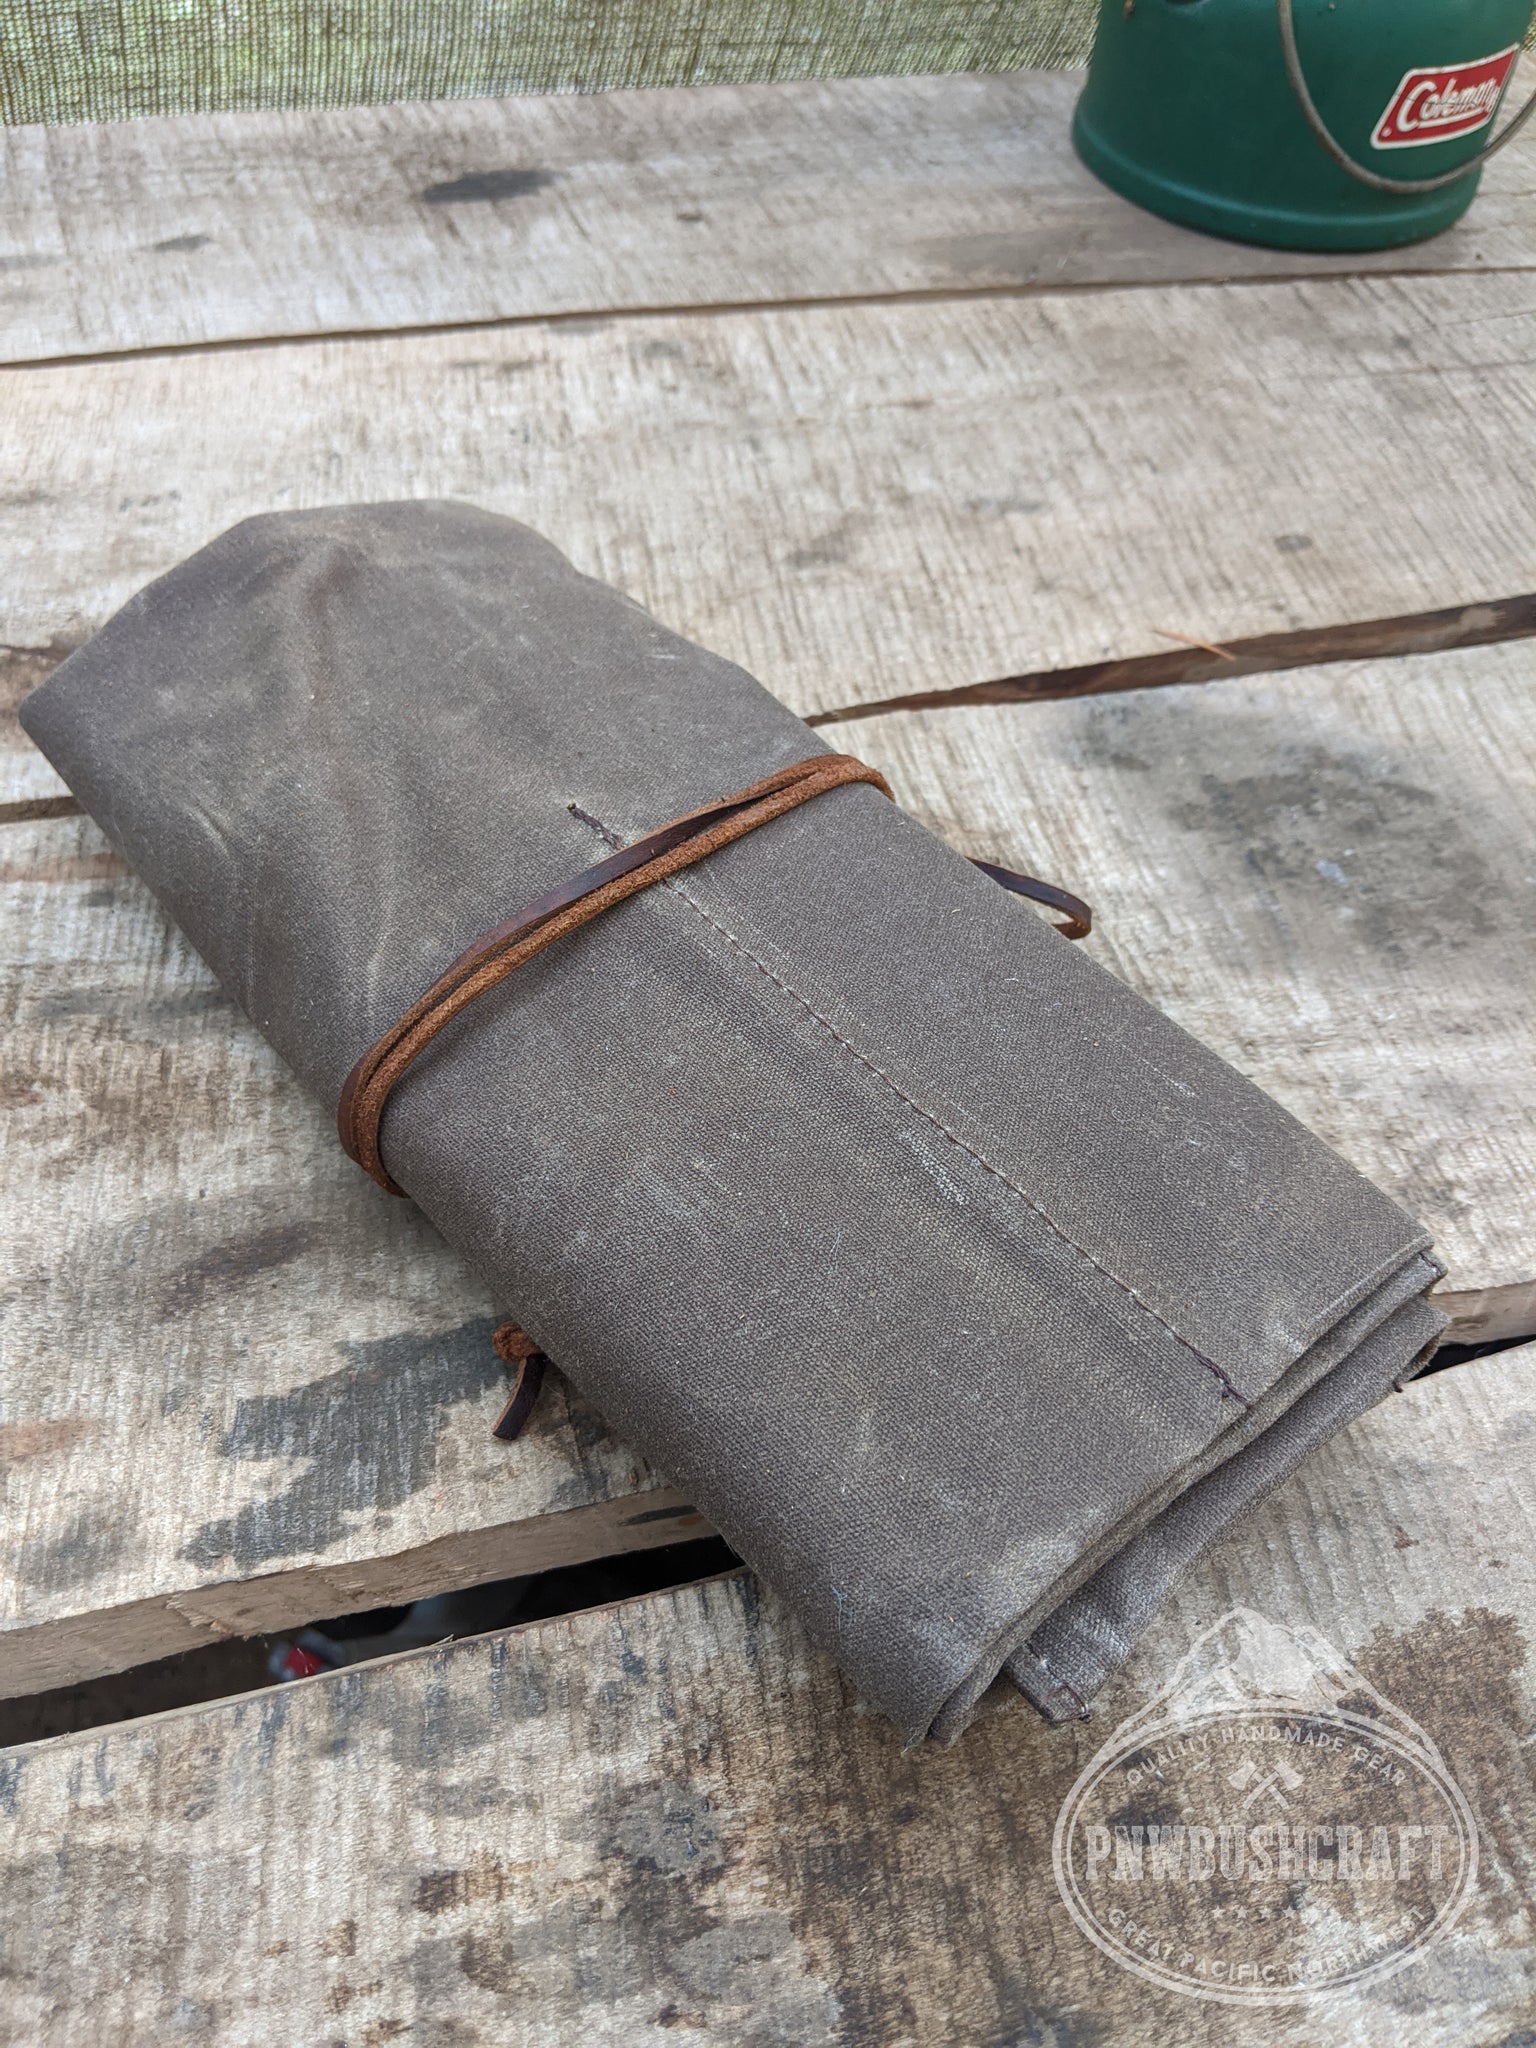 Tool Roll | Wrench roll up | Waxed Canvas & Leather | Handmade